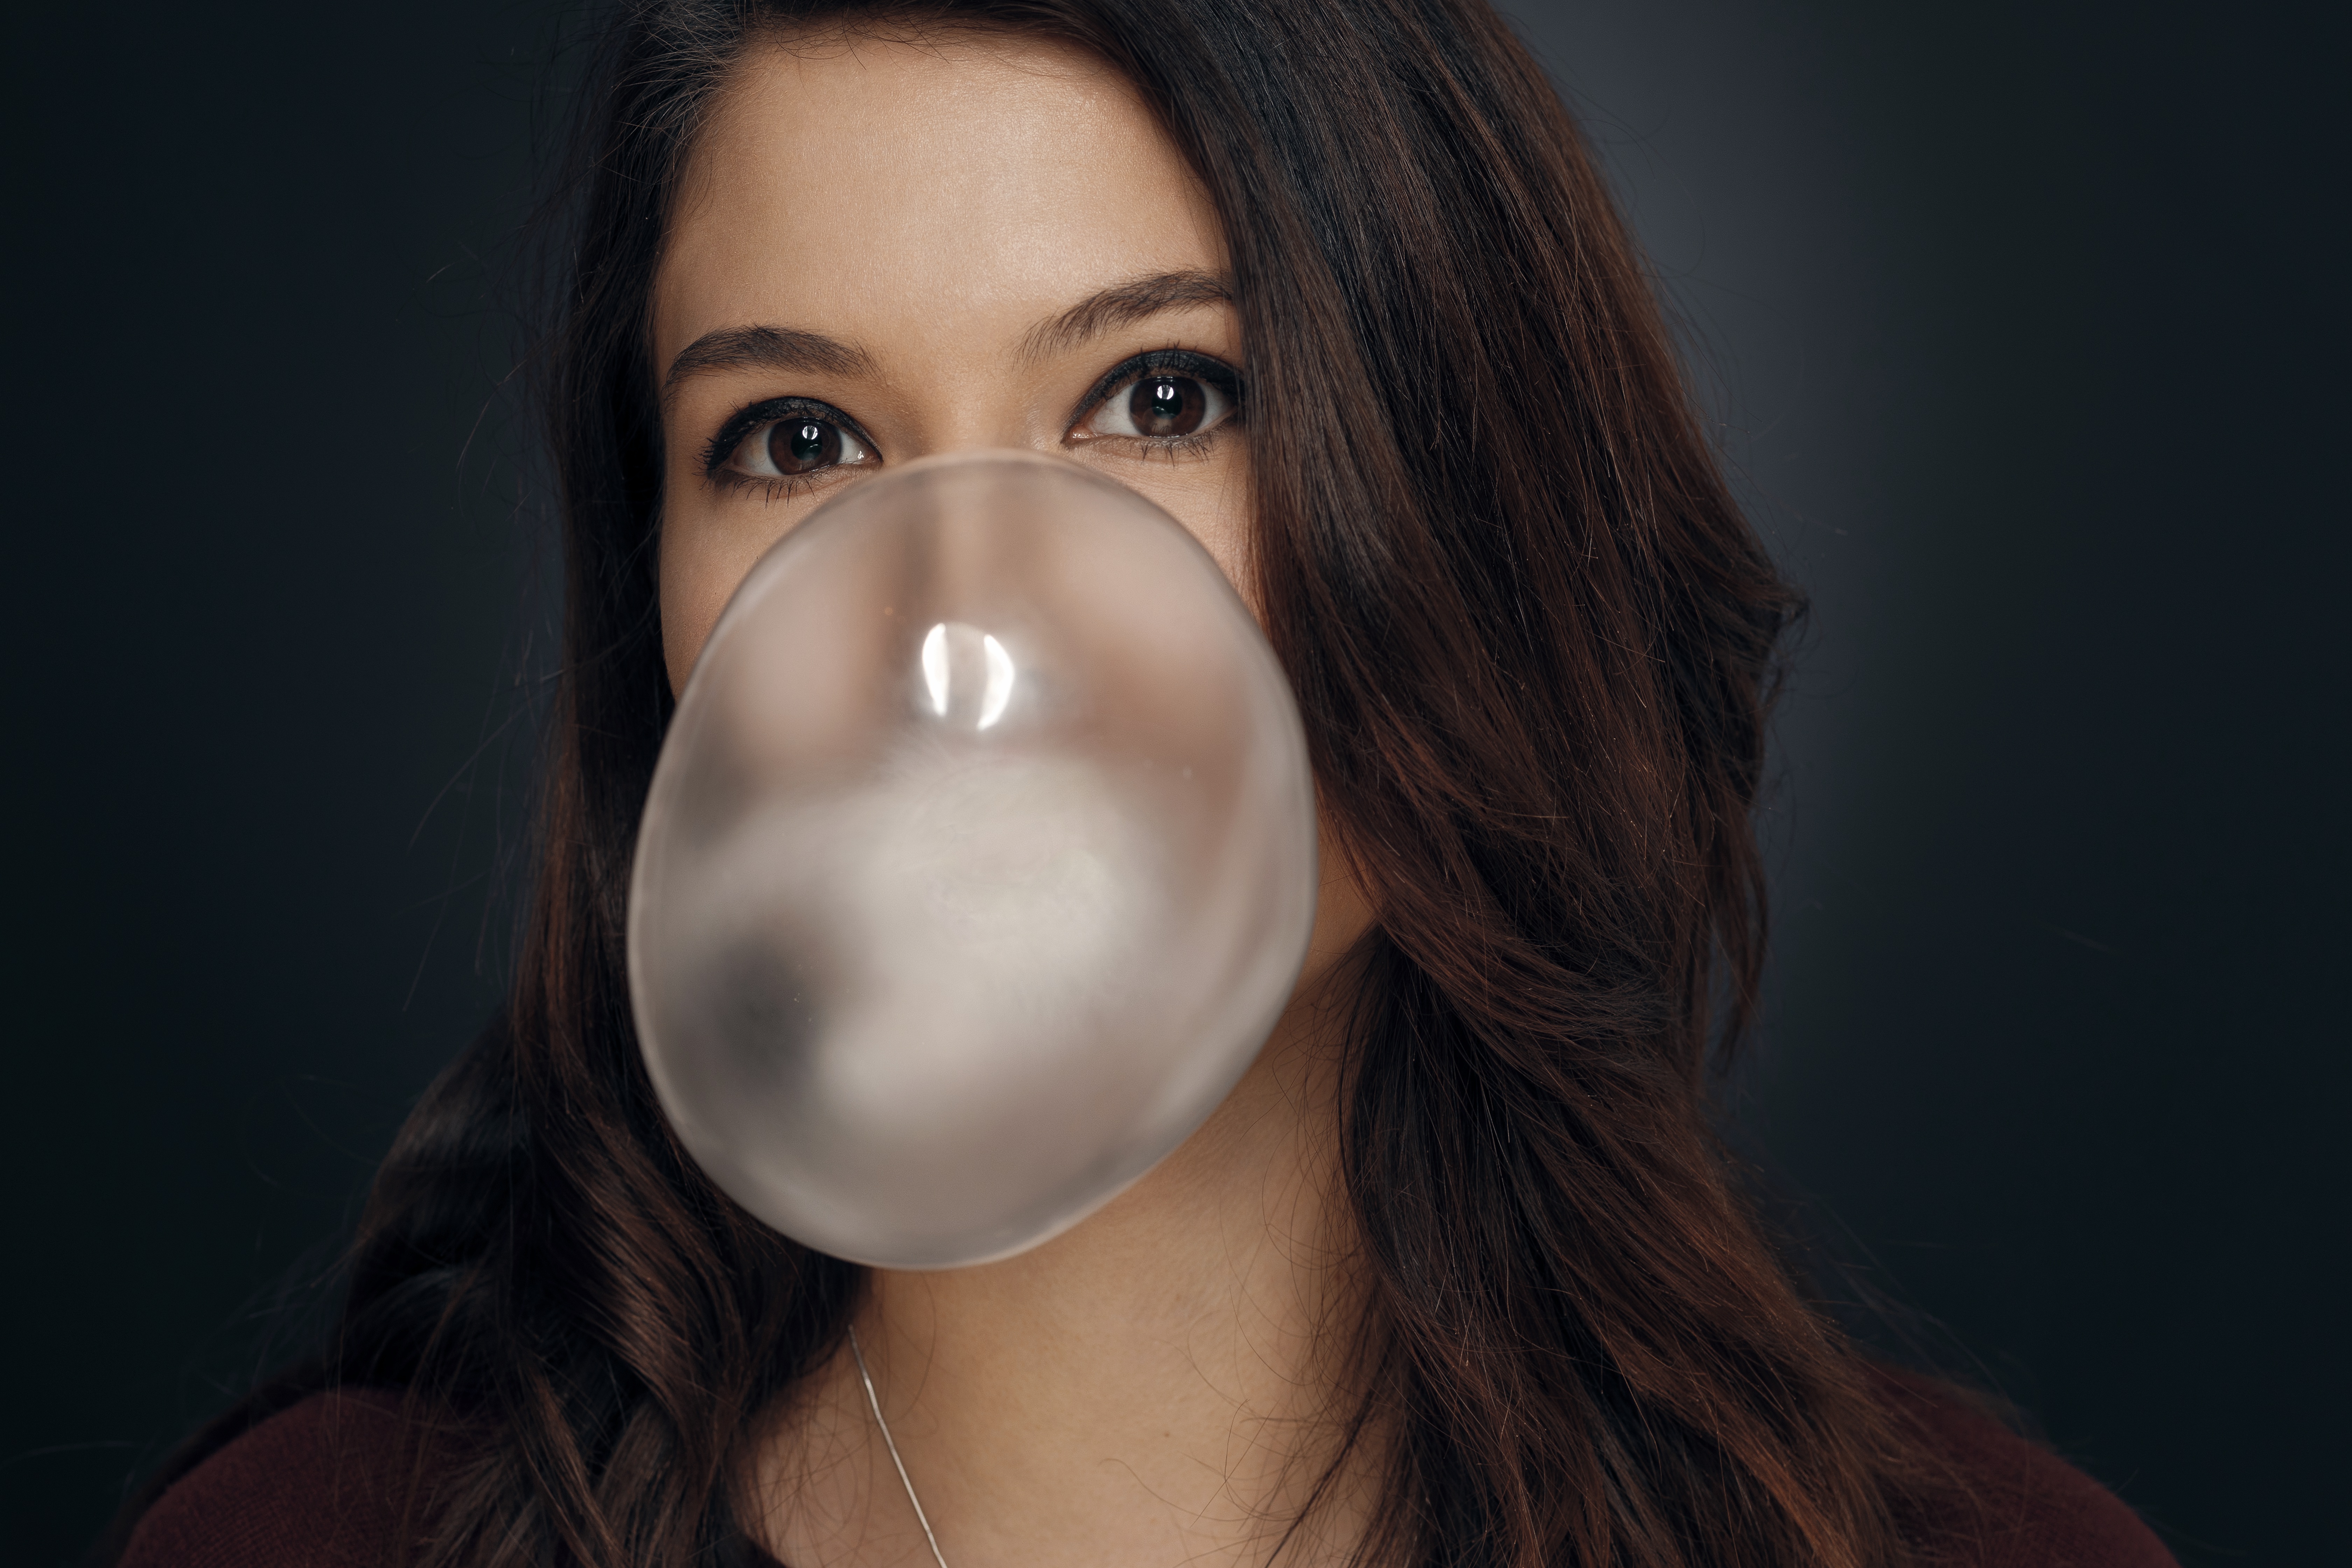 Woman Model Girl Face Brunette Brown Eyes Chewing Gum 6720x4480